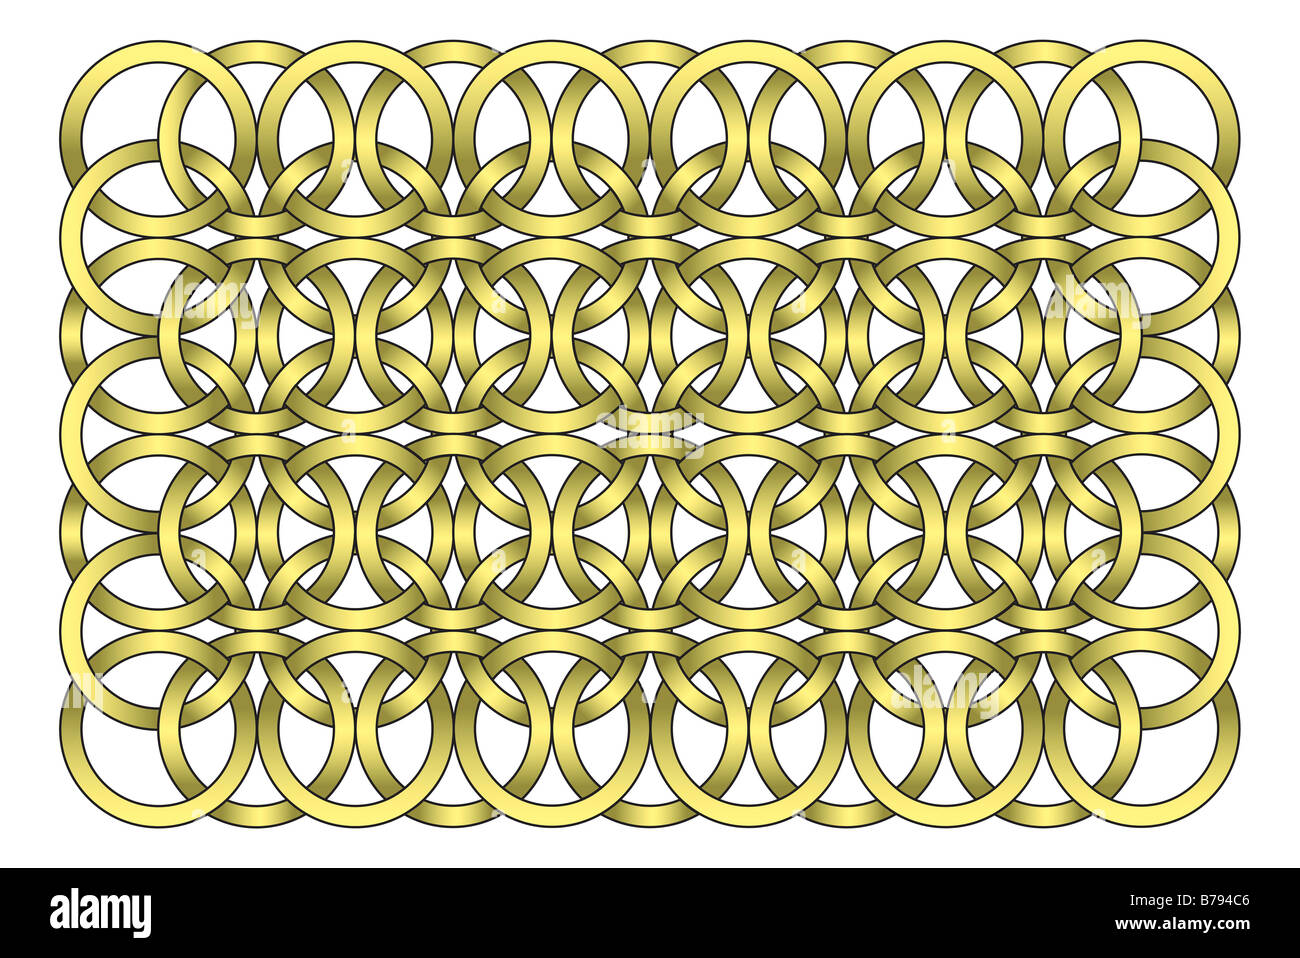 Decorative golden chain link illustration isolated on white Stock Photo